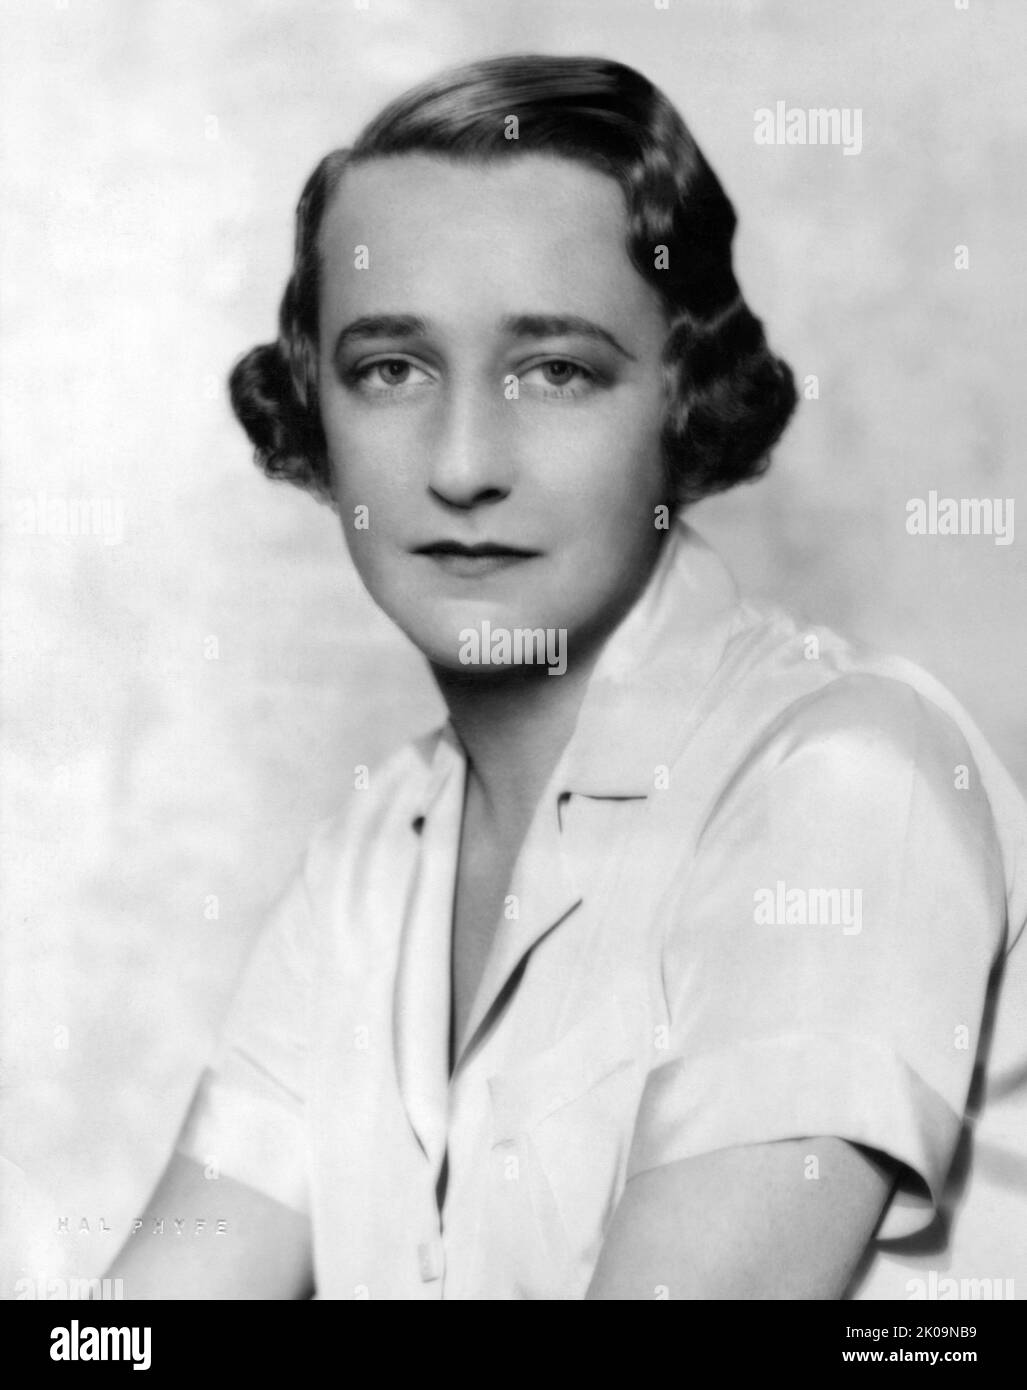 Lillian Florence Hellman (1905 - 1984) American playwright, author, and screenwriter known for her success on Broadway, as well as her communist sympathies and political activism. She was blacklisted after her appearance before the House Committee on Un-American Activities (HUAC) at the height of the anti-communist campaigns of 1947-1952. Although she continued to work on Broadway in the 1950s, her blacklisting by the American film industry caused a drop in her income. Many praised Hellman for refusing to answer questions by HUAC, but others believed, despite her denial, that she had belonged Stock Photo